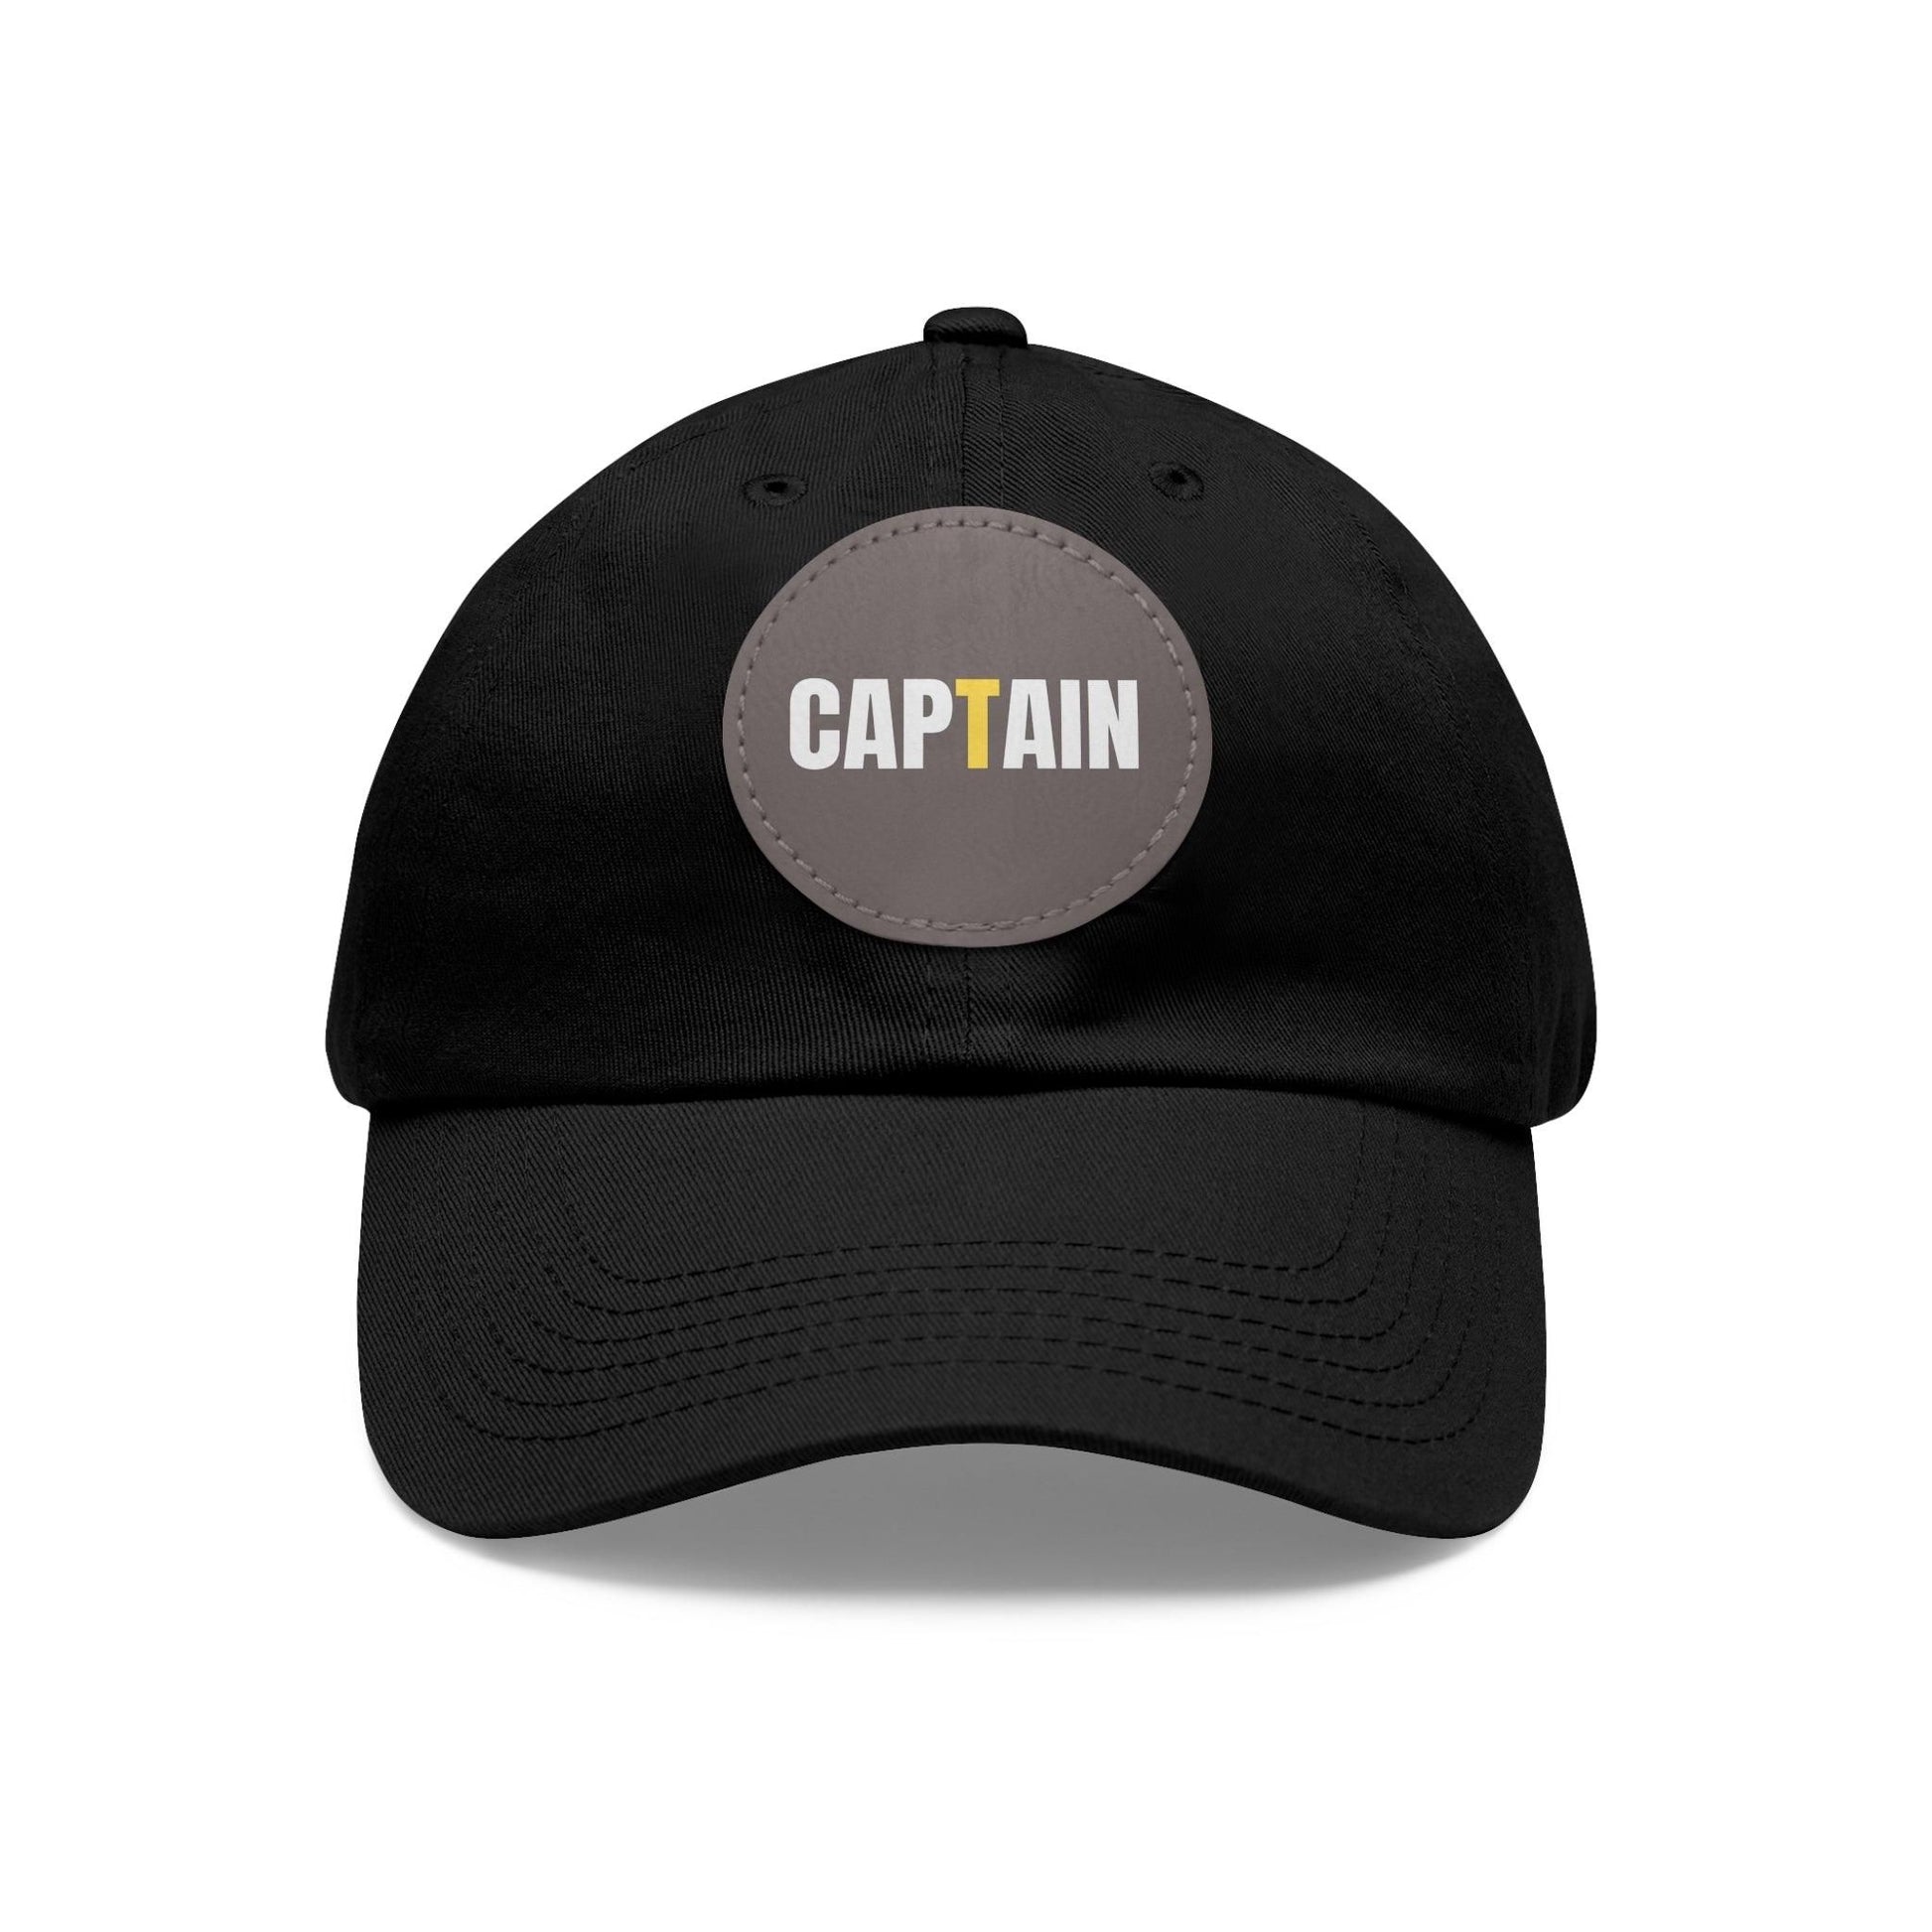 Captain Baseball Hat with Leather Patch Cap Black / Grey patch Circle One size